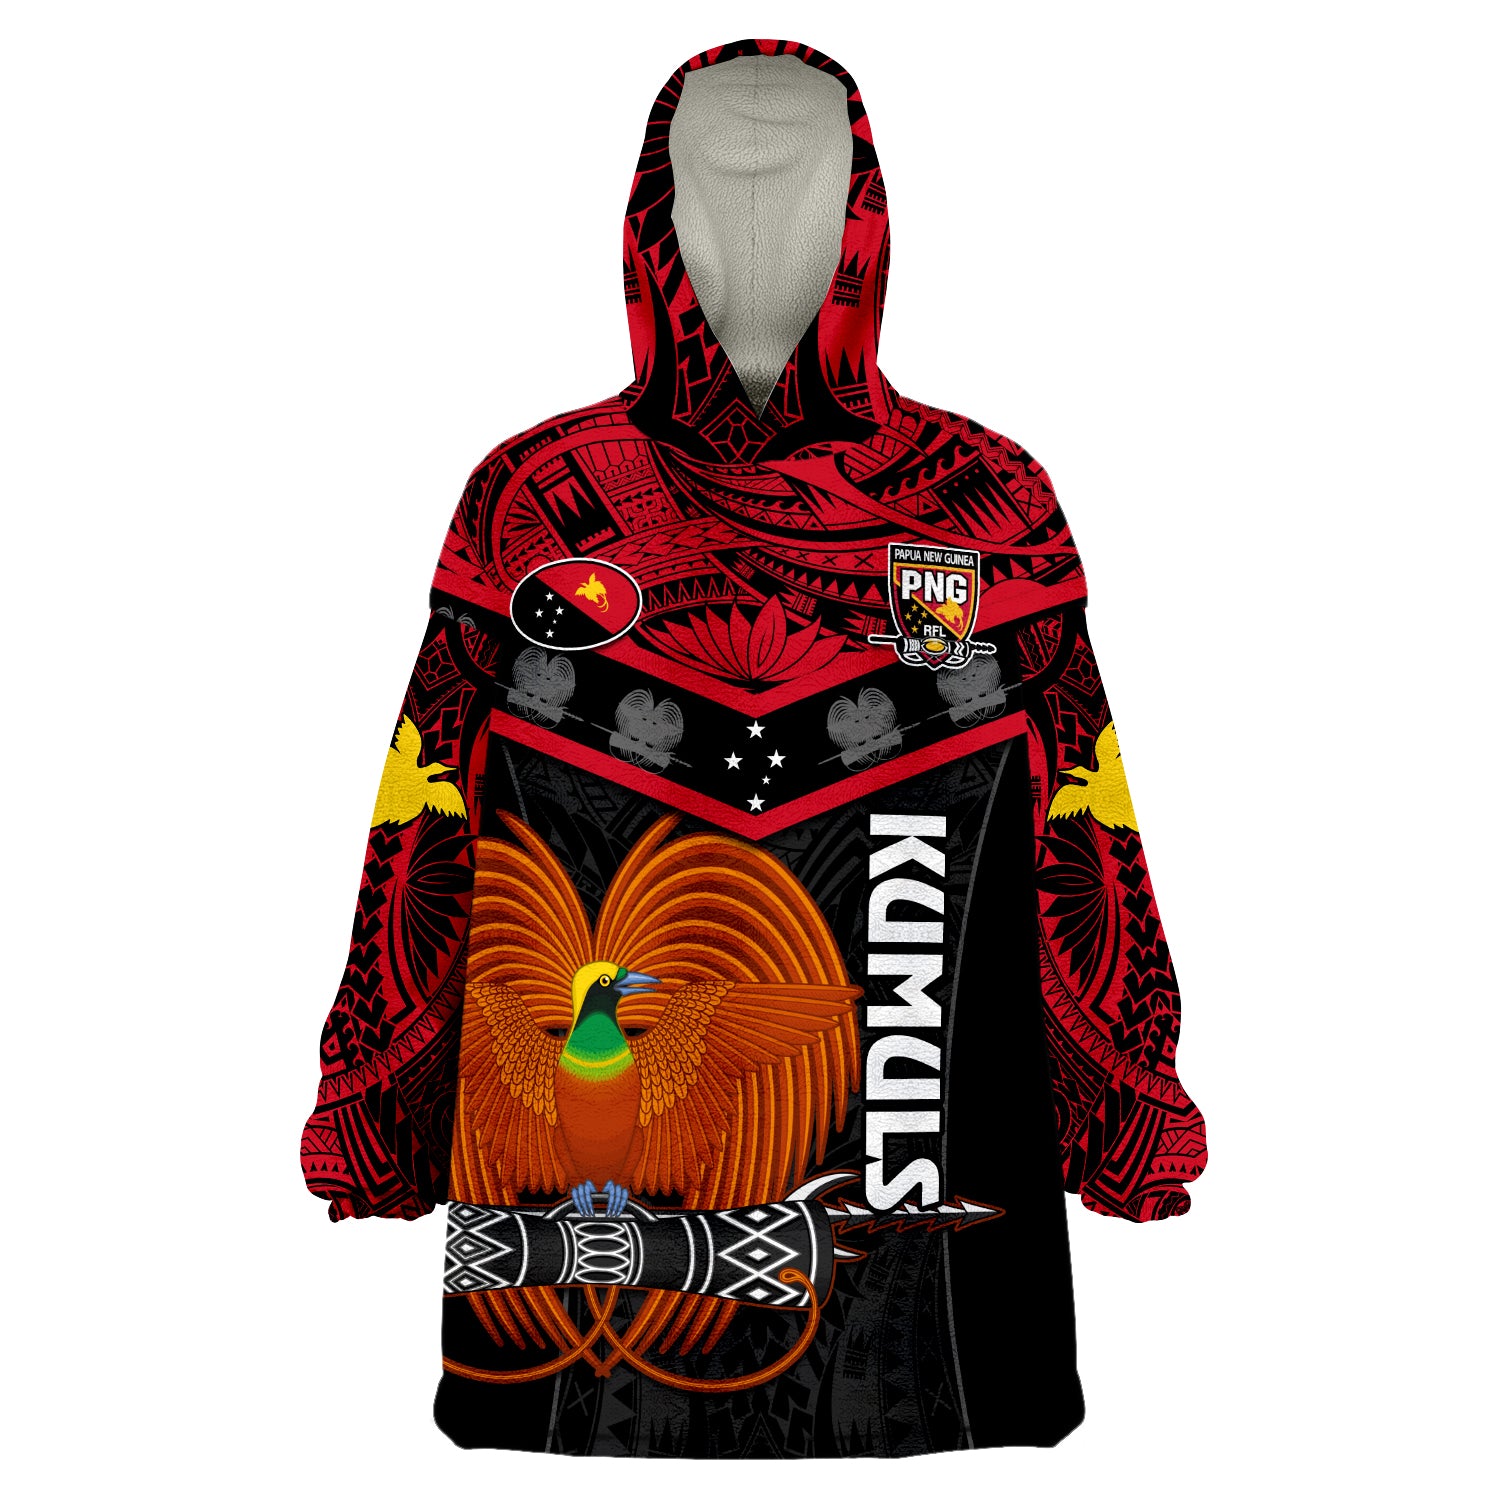 custom-text-and-number-papua-new-guinea-rugby-png-kumuls-bird-of-paradise-black-wearable-blanket-hoodie